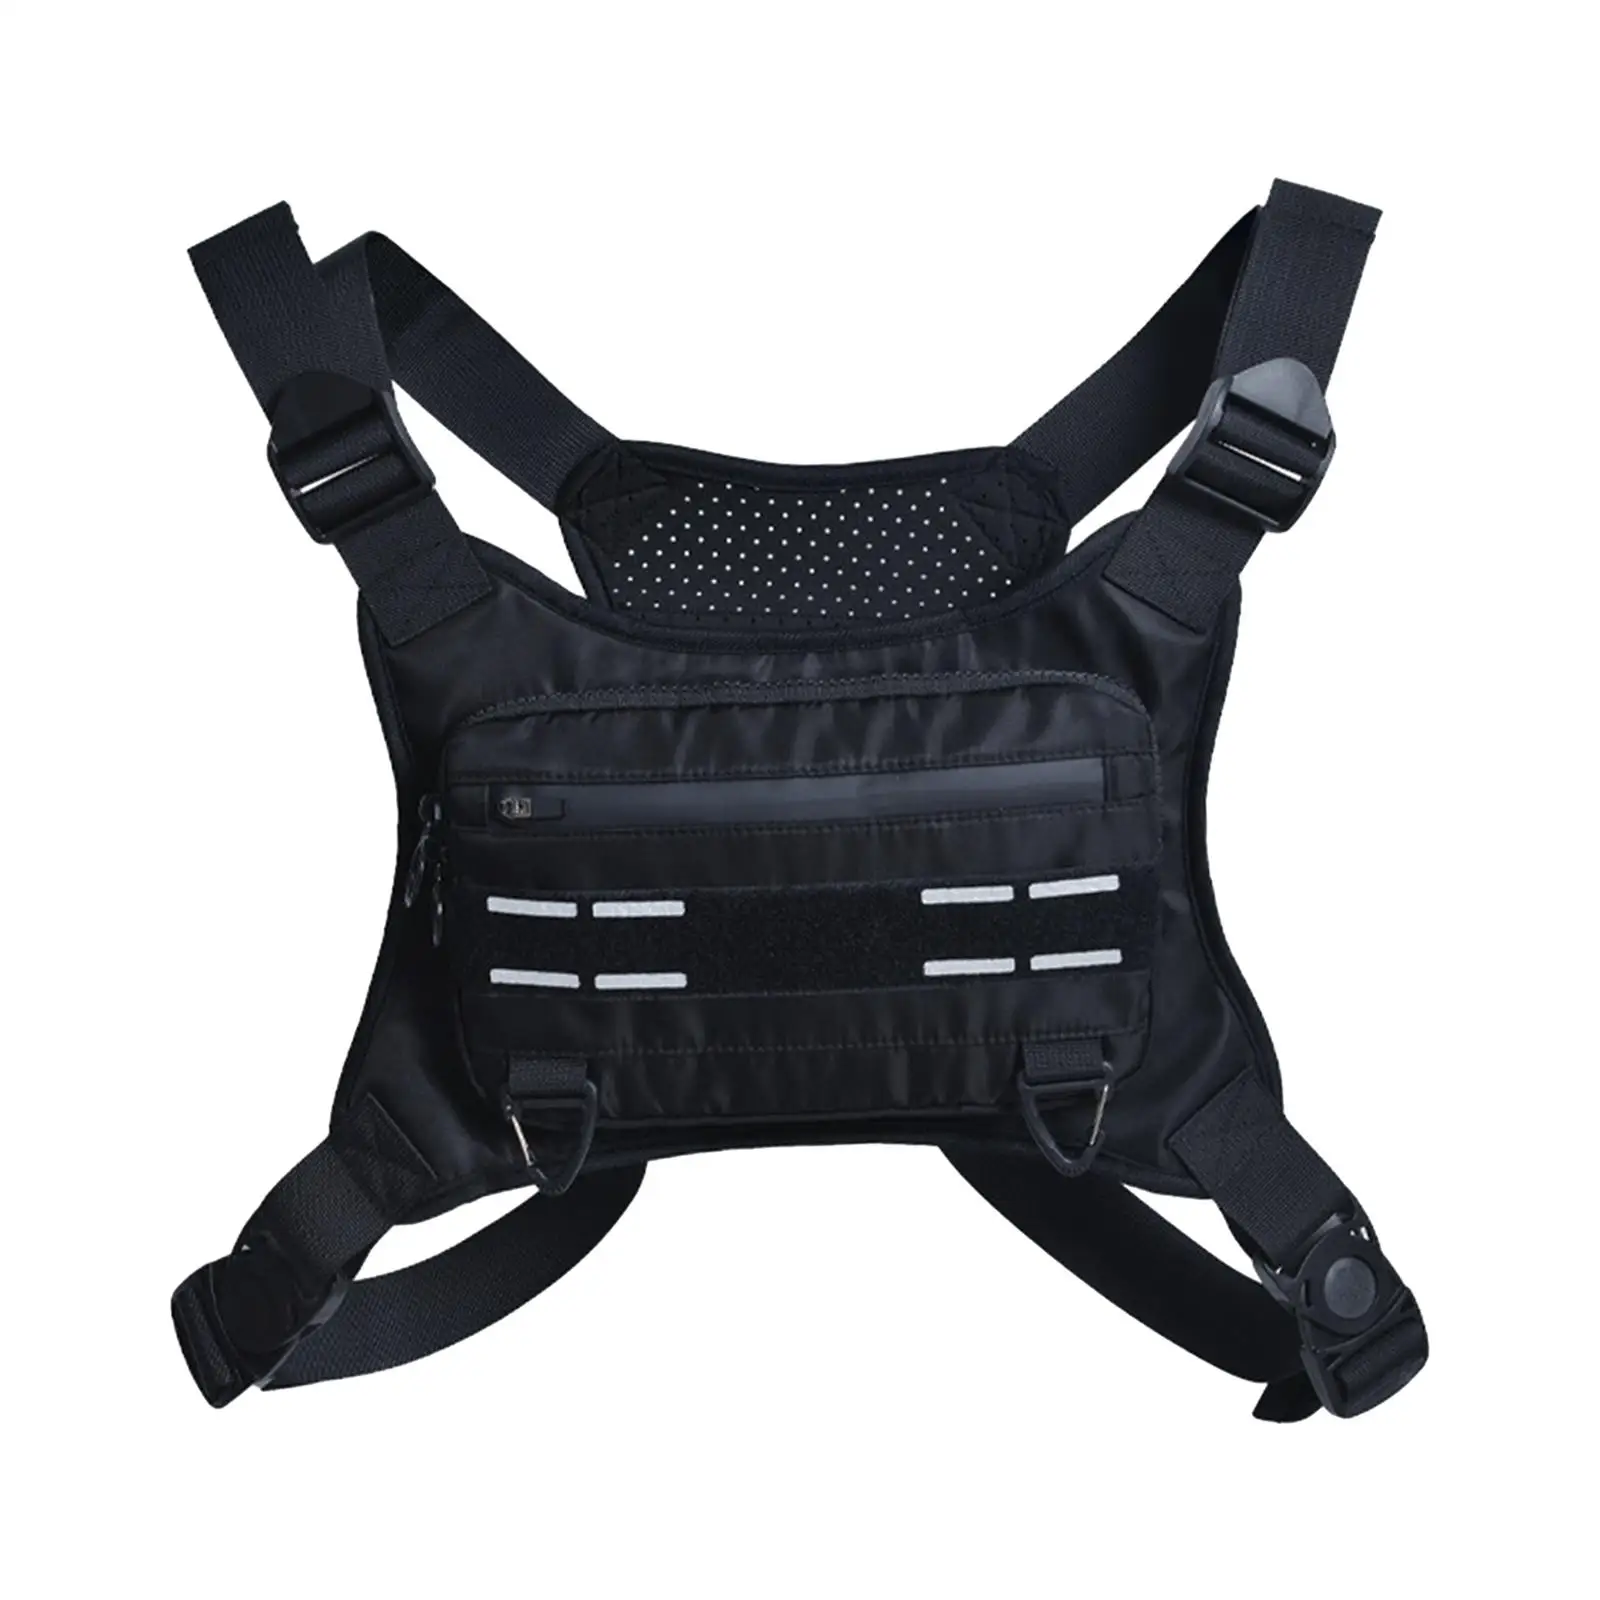 Chest Rig Bag with Adjustable Shoulder Straps Outdoor Multifunction Running Chest Pack for Camping Riding Hunting Sports Travel